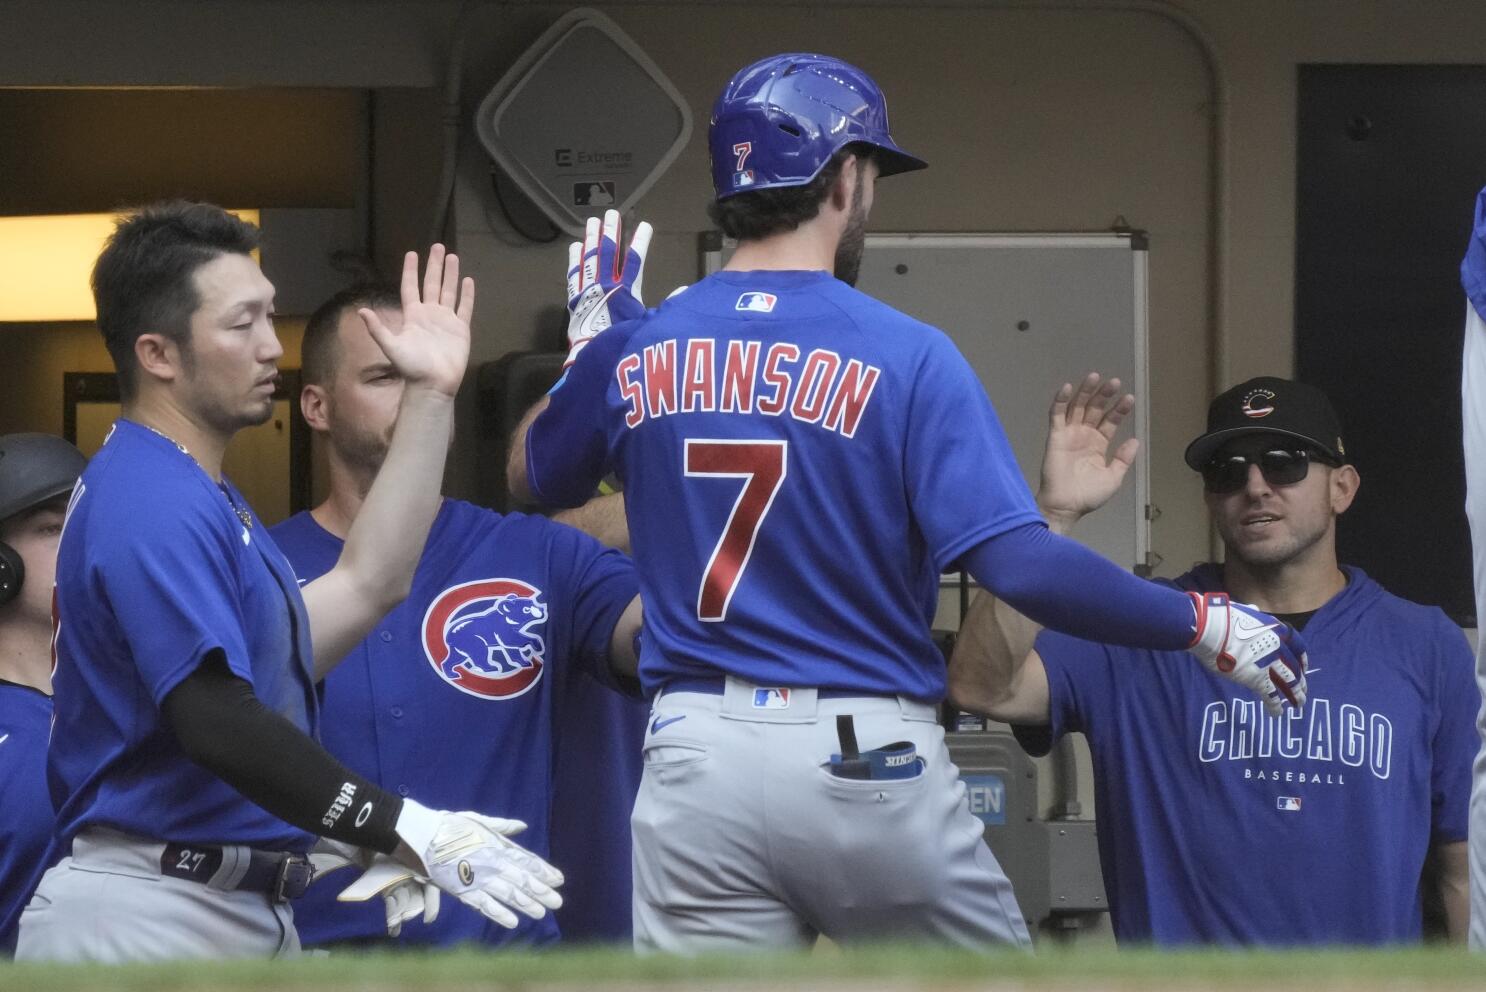 Chicago Cubs, World Series champions: Game 7 provides excruciating